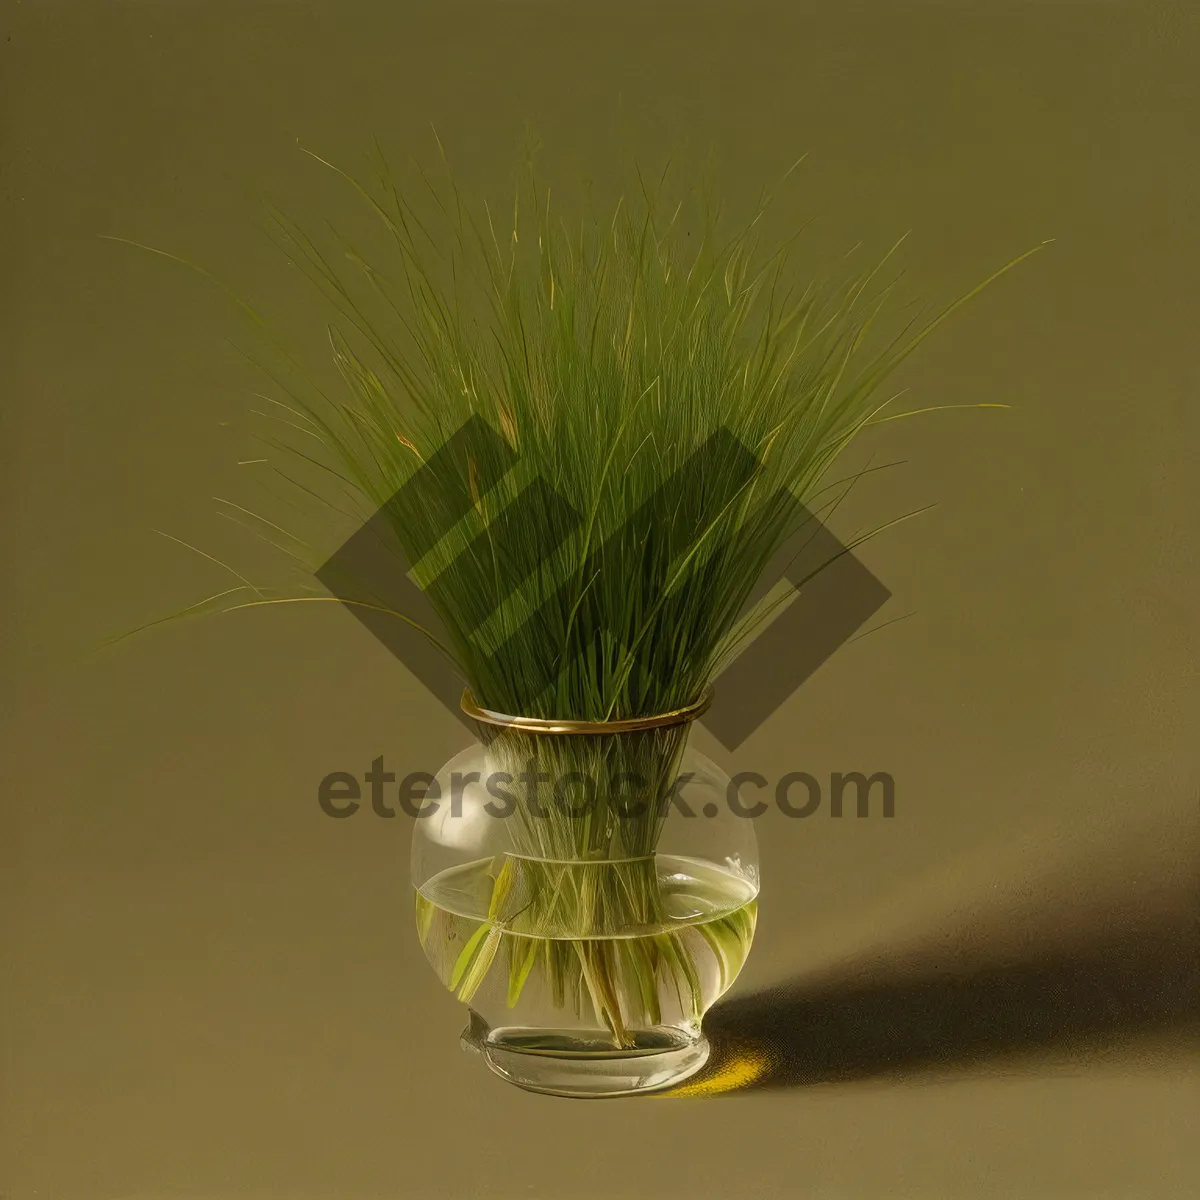 Picture of Summer Shaving Brush with Horsetail Plant